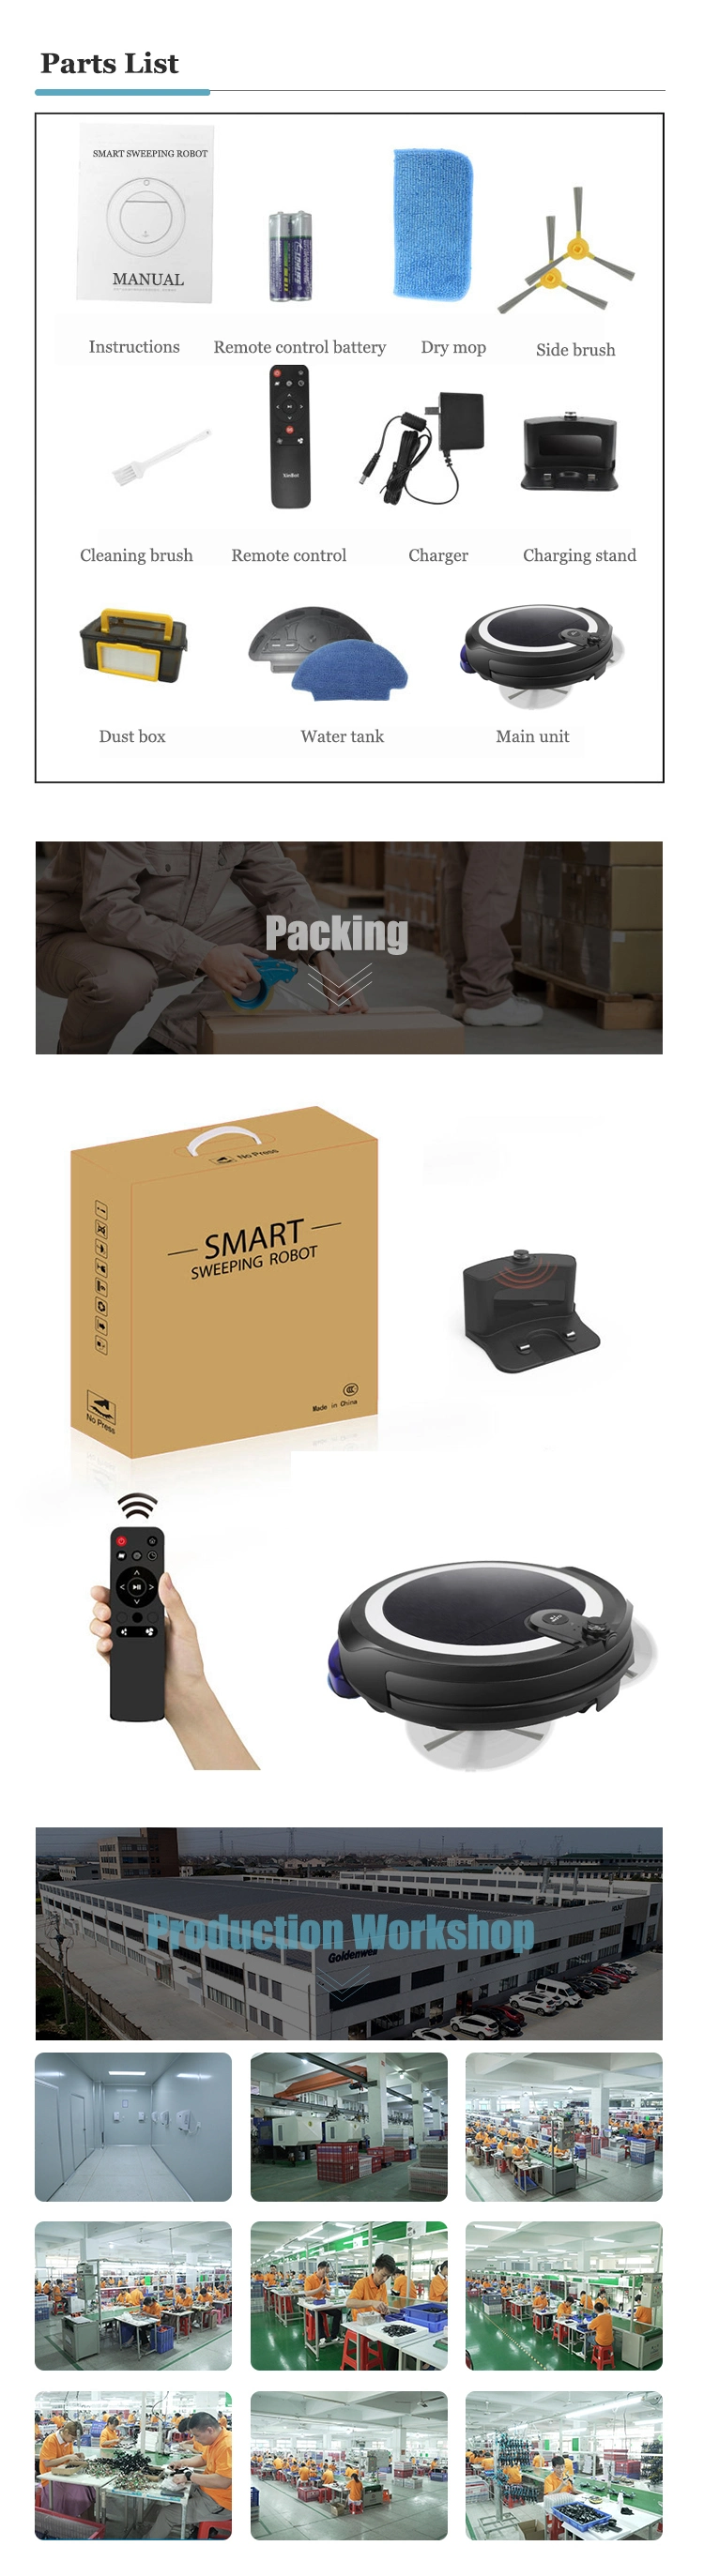 OEM New Arrival Smart Robot Vacuum Cleaner for Sweeping Sucking and Mopping Integration